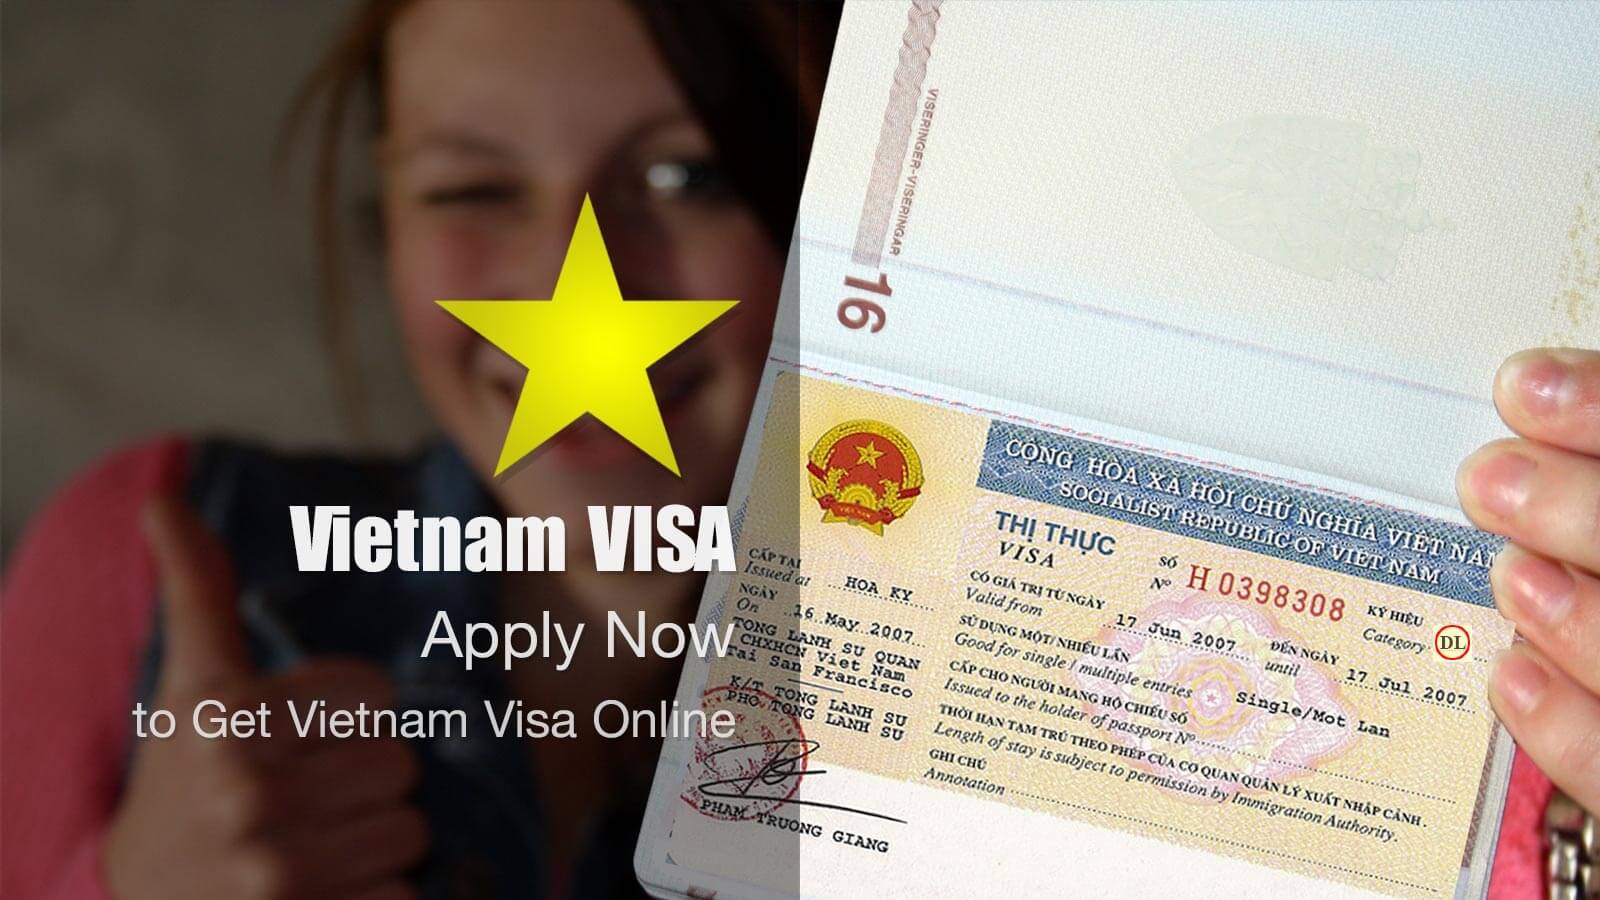 How to Quickly Obtain Immediate Vietnam Visa Services (Urgent and Emergency)